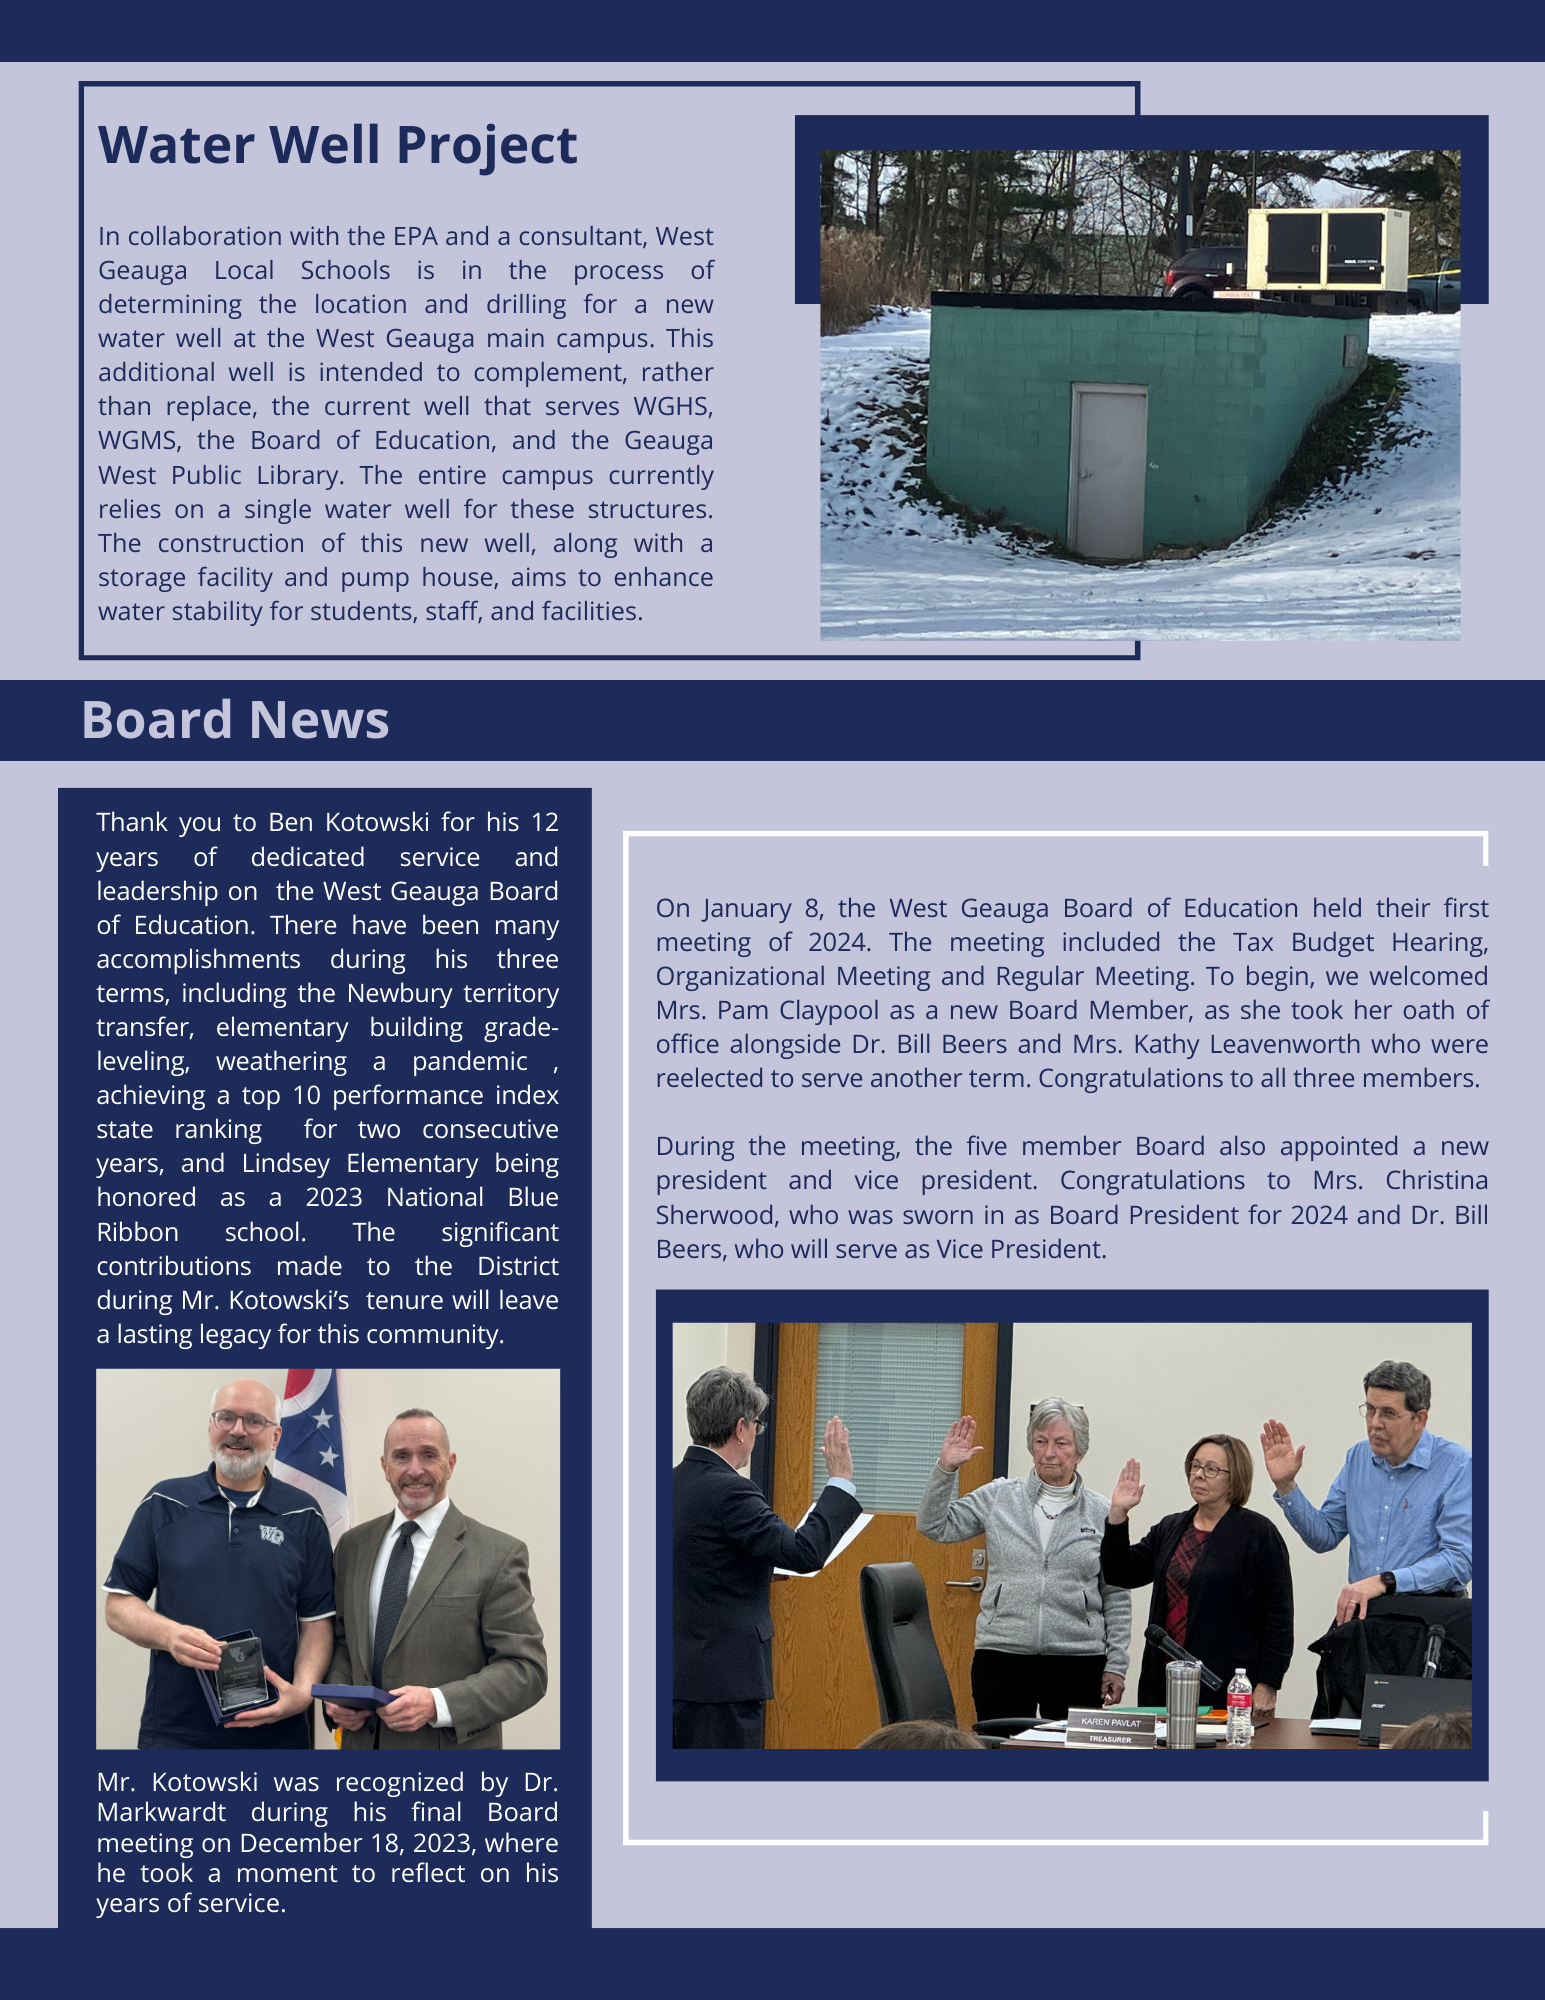 Water well project and Board news articles